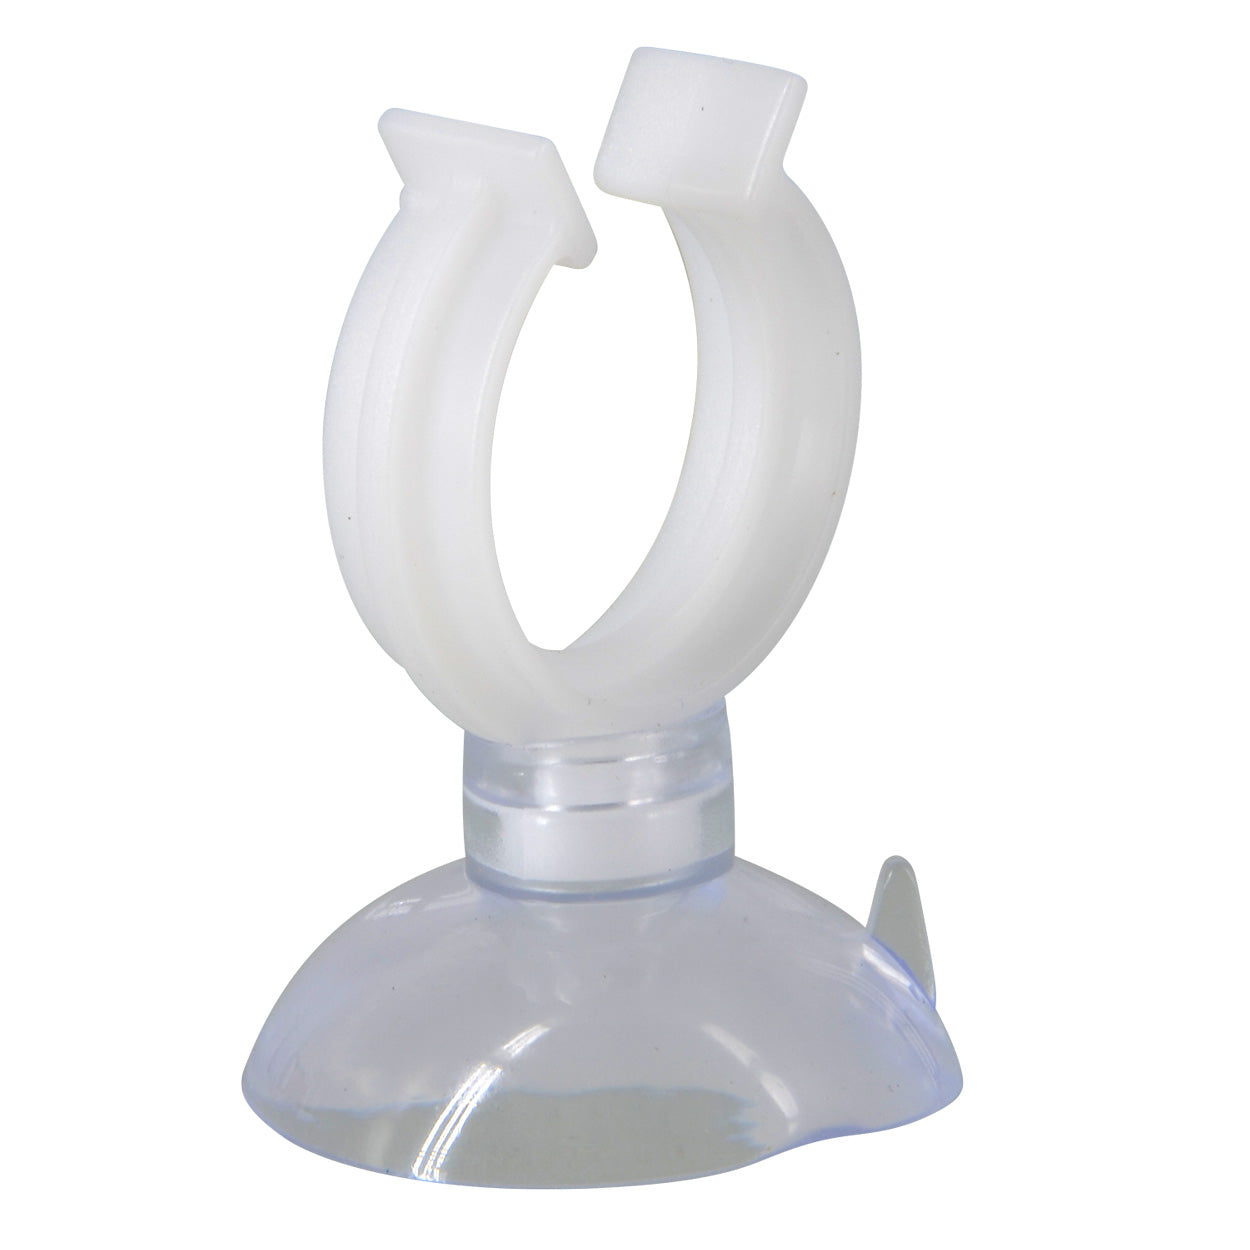 Suction Cups Large (2 units)